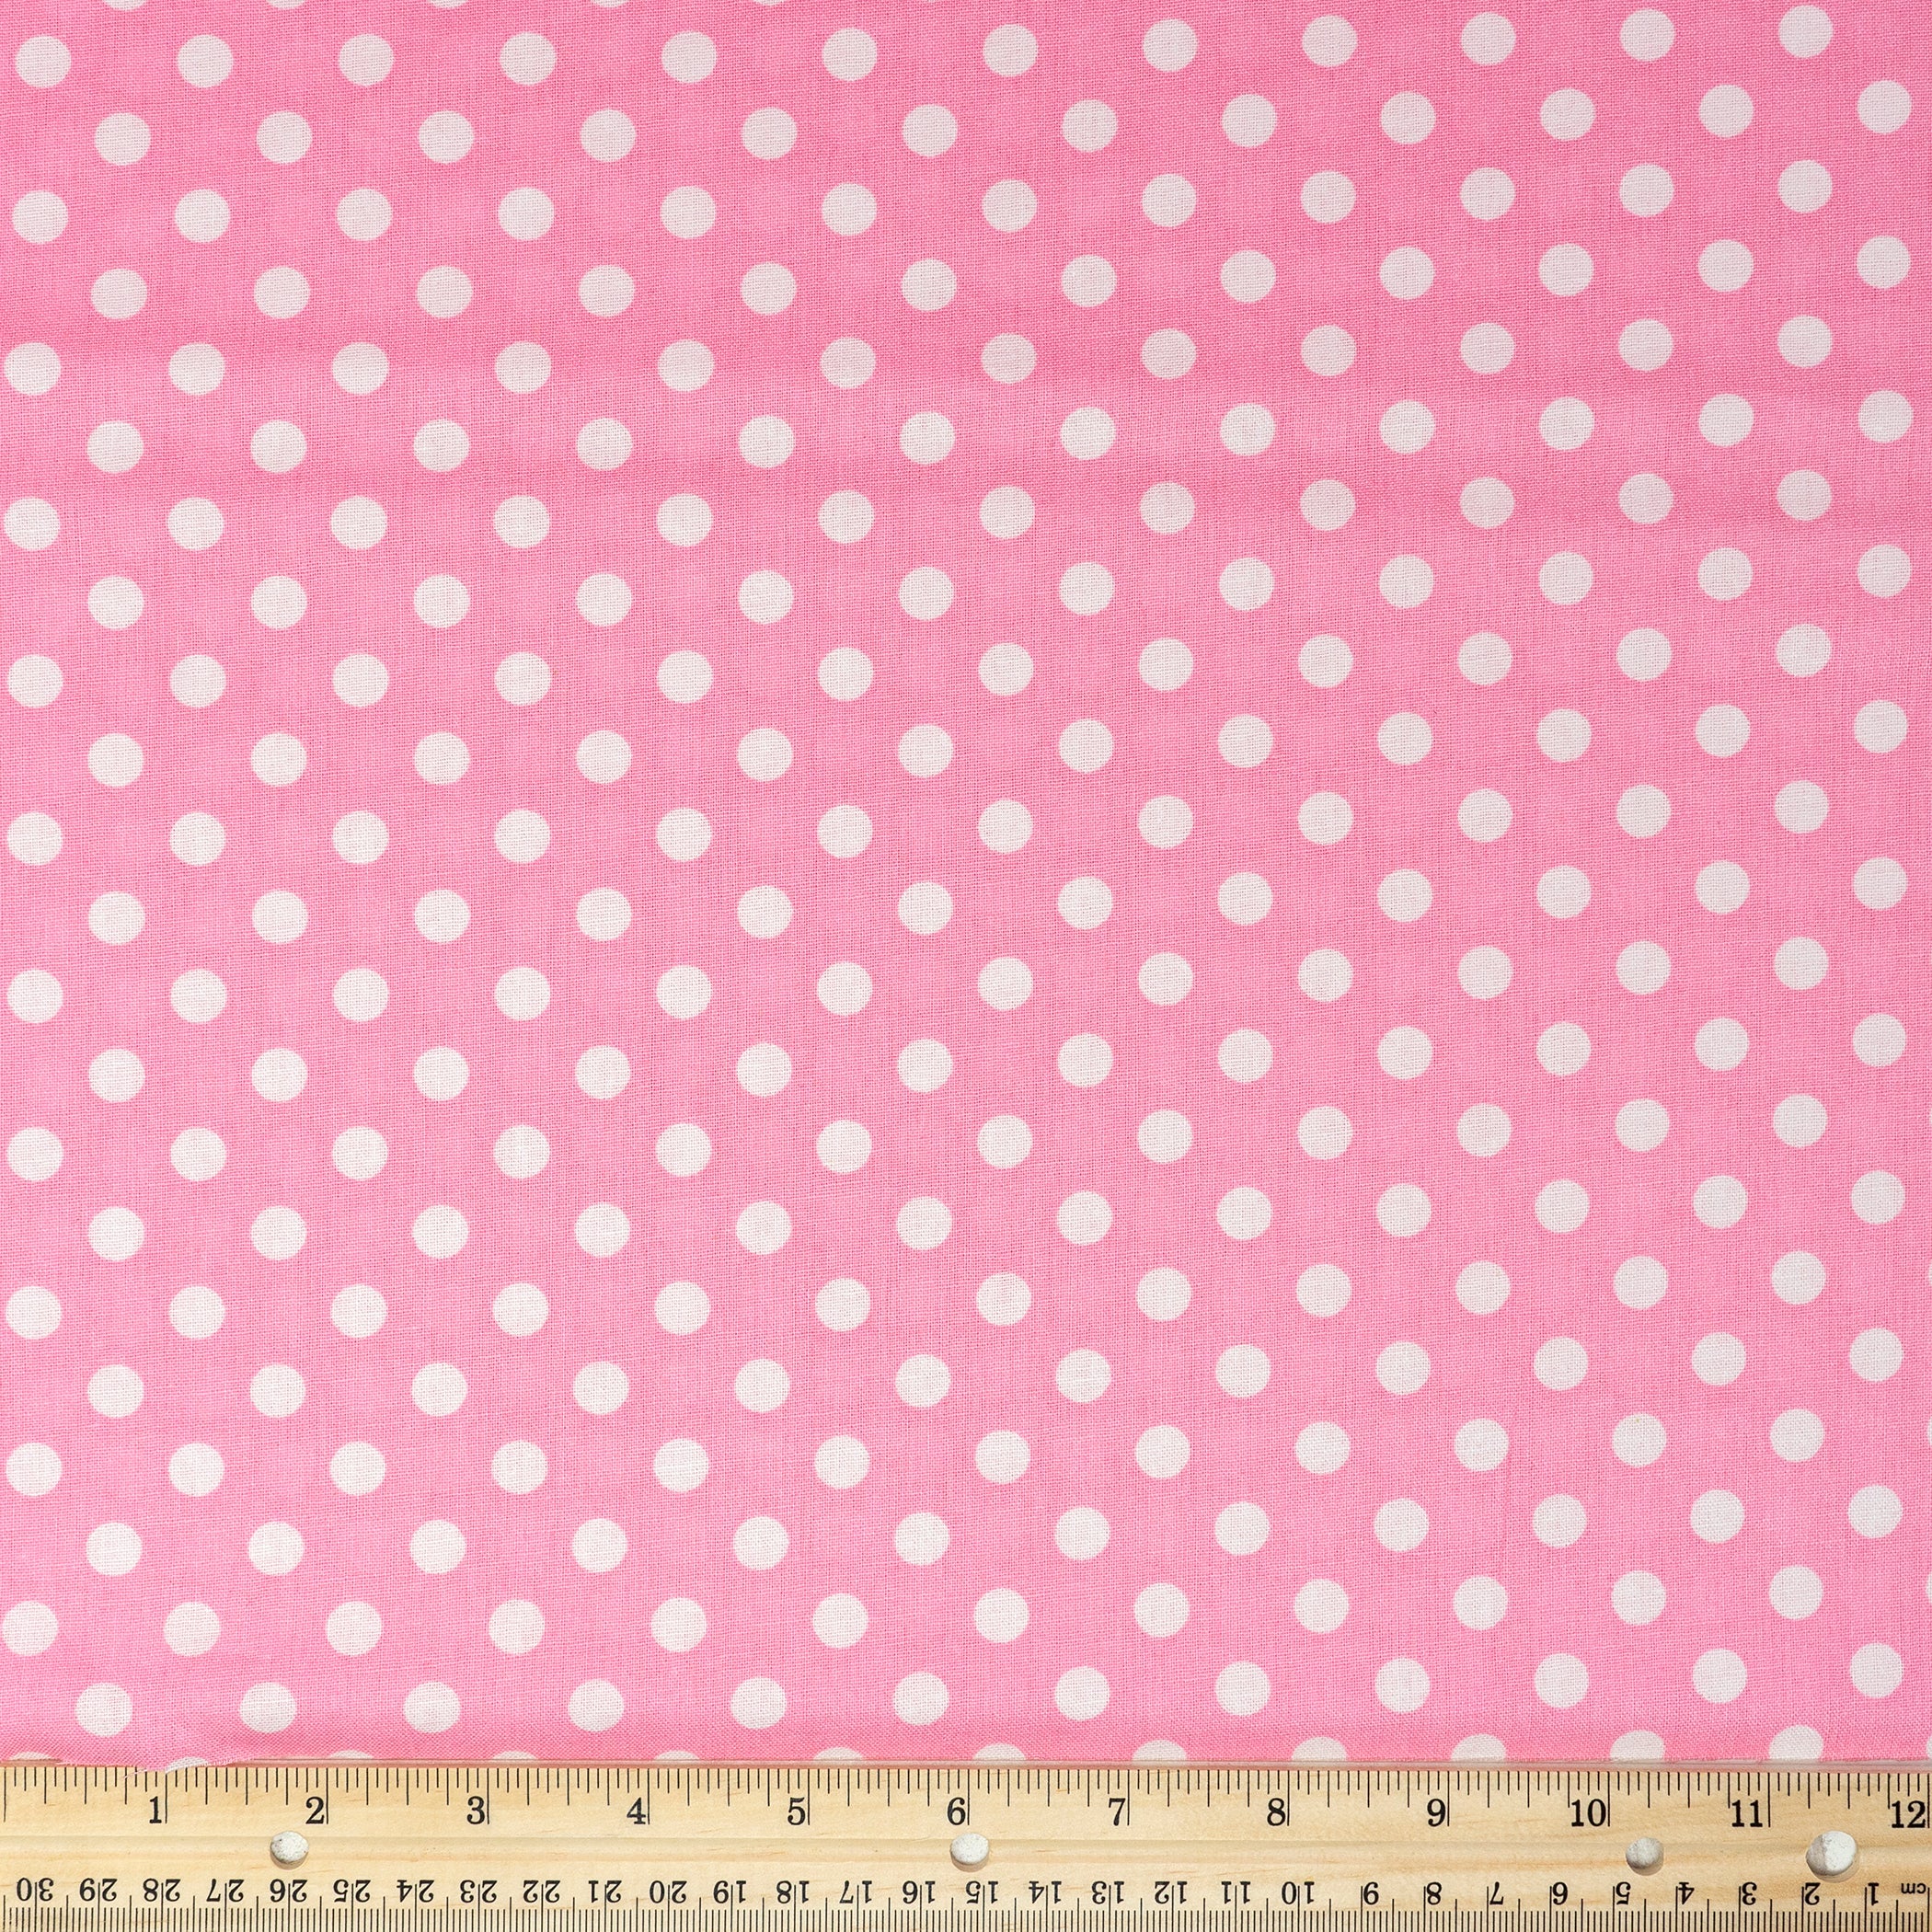 Waverly Inspirations Cotton 44" Big Dots Carnation Color Sewing Fabric by the Yard